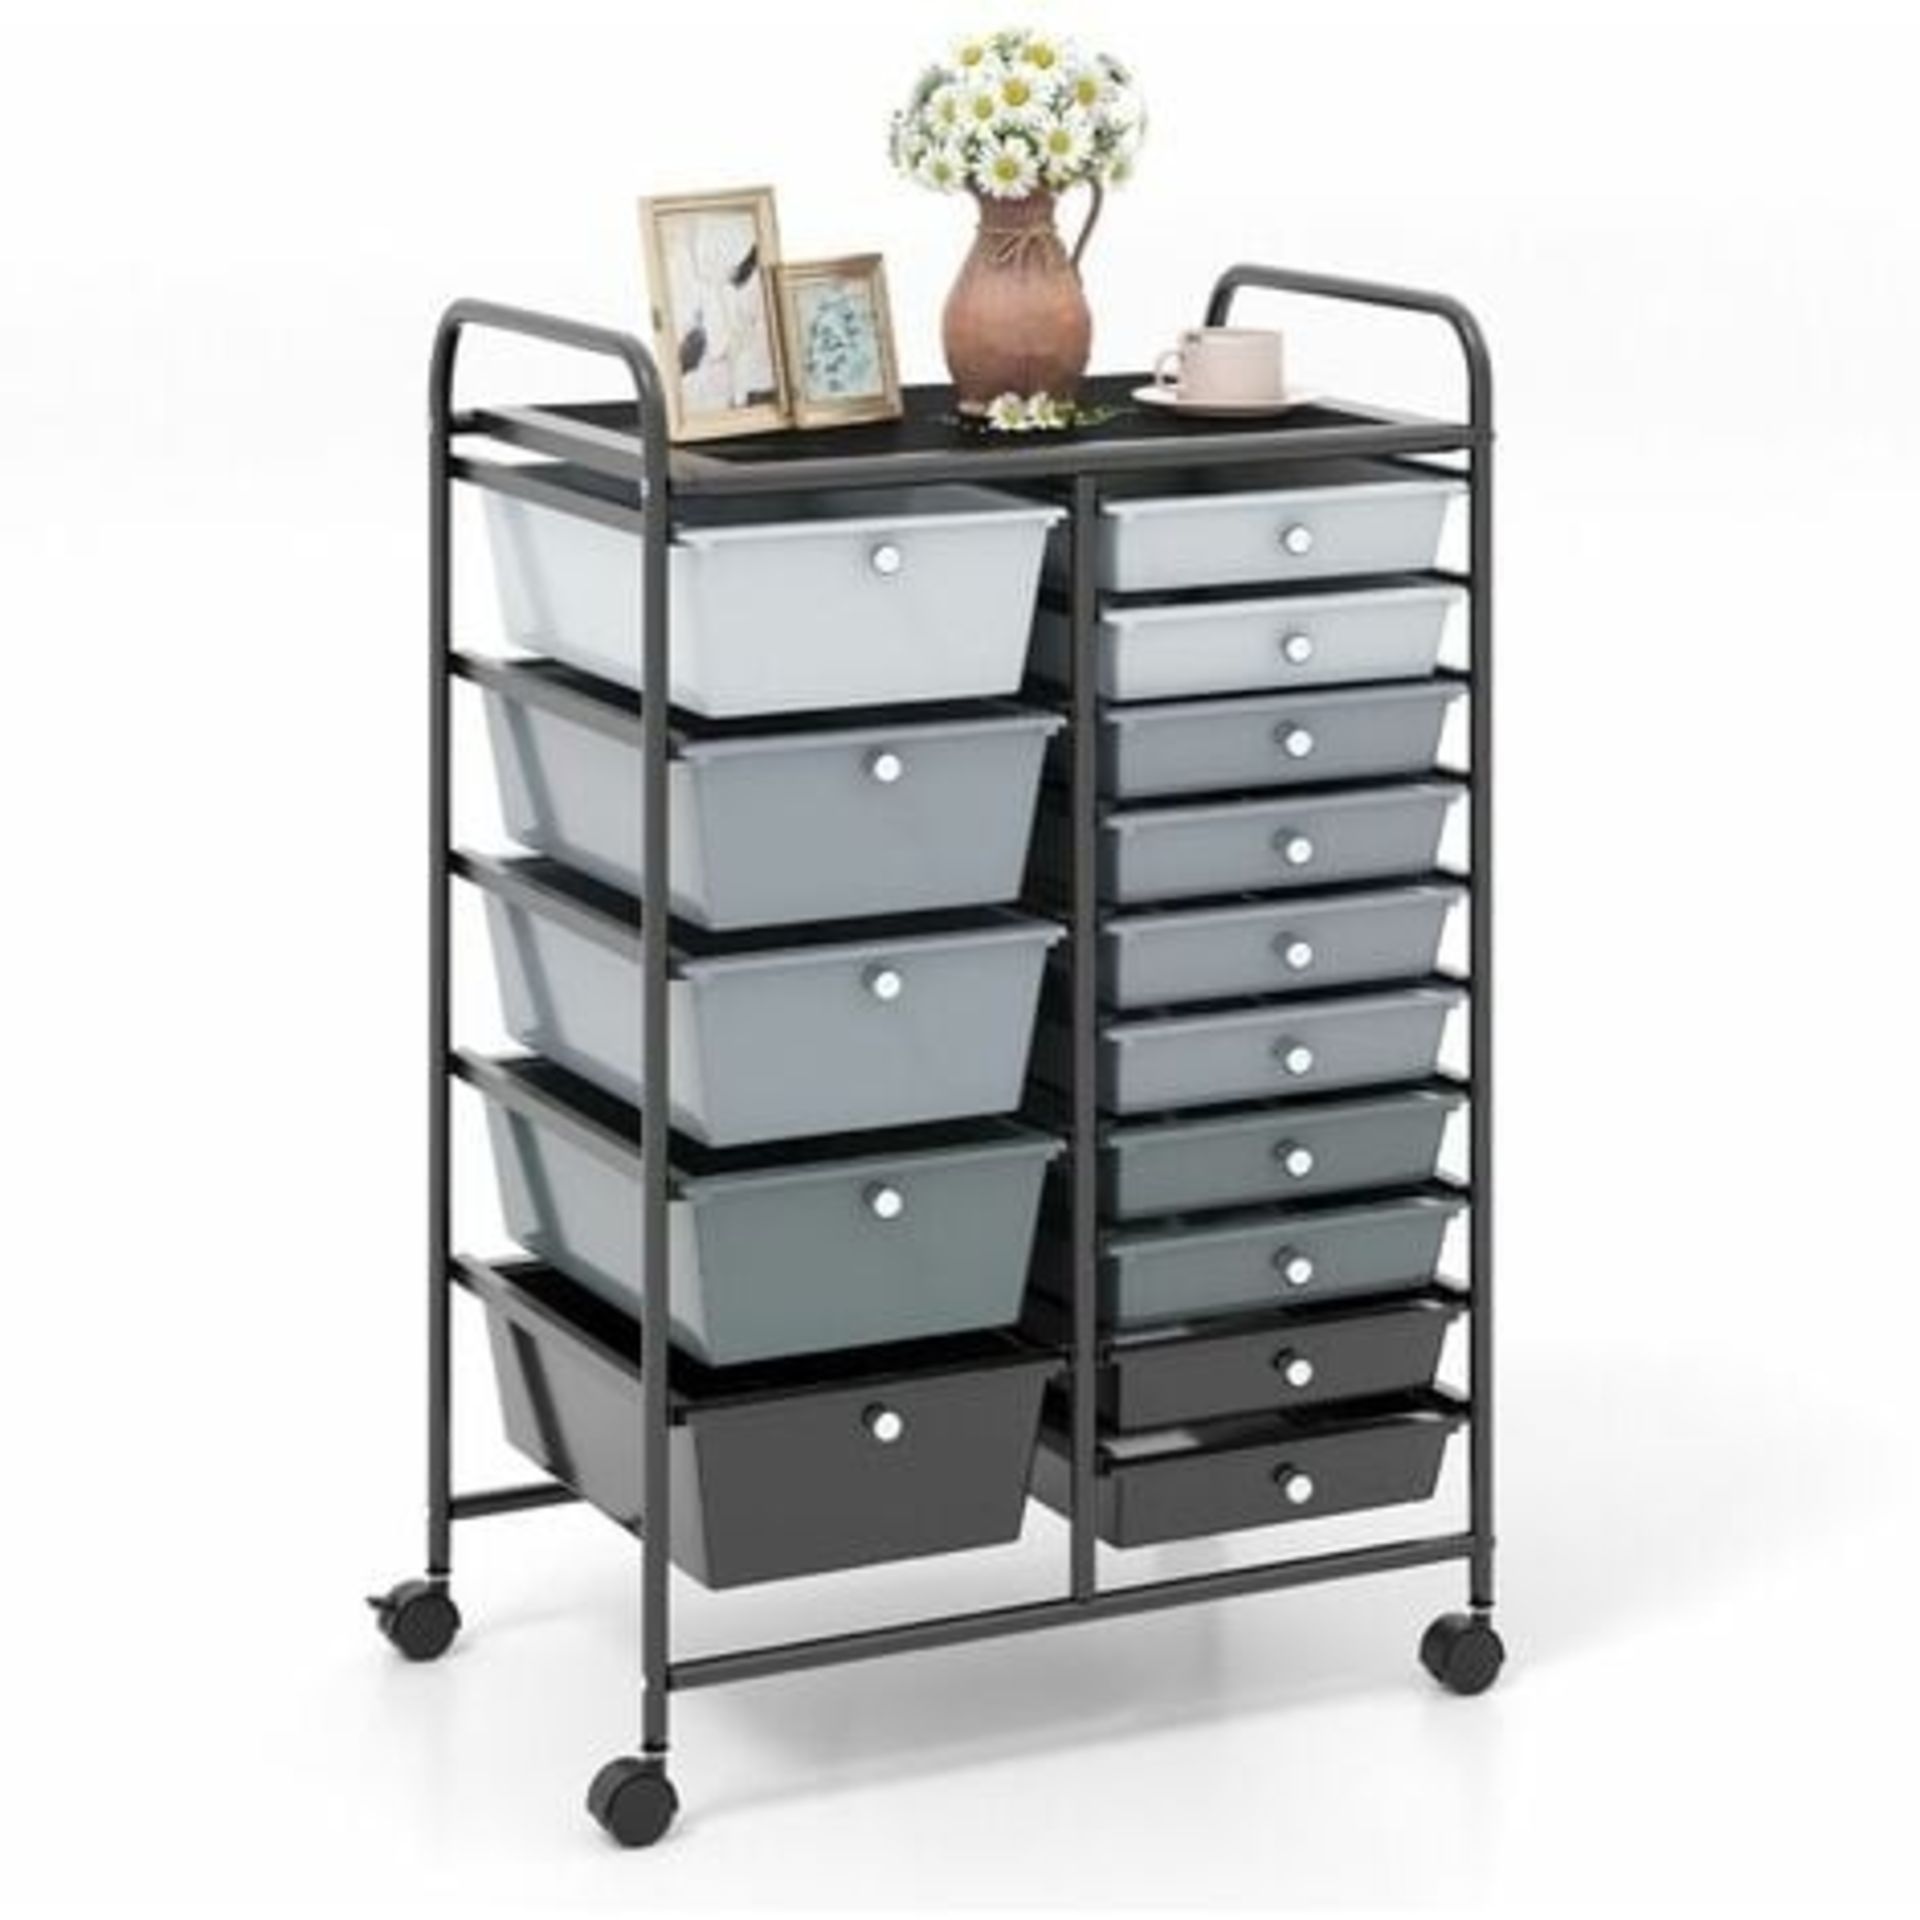 15 Drawers Storage Trolley Mobile Rolling Utility Cart Home Office Organizer - ER53